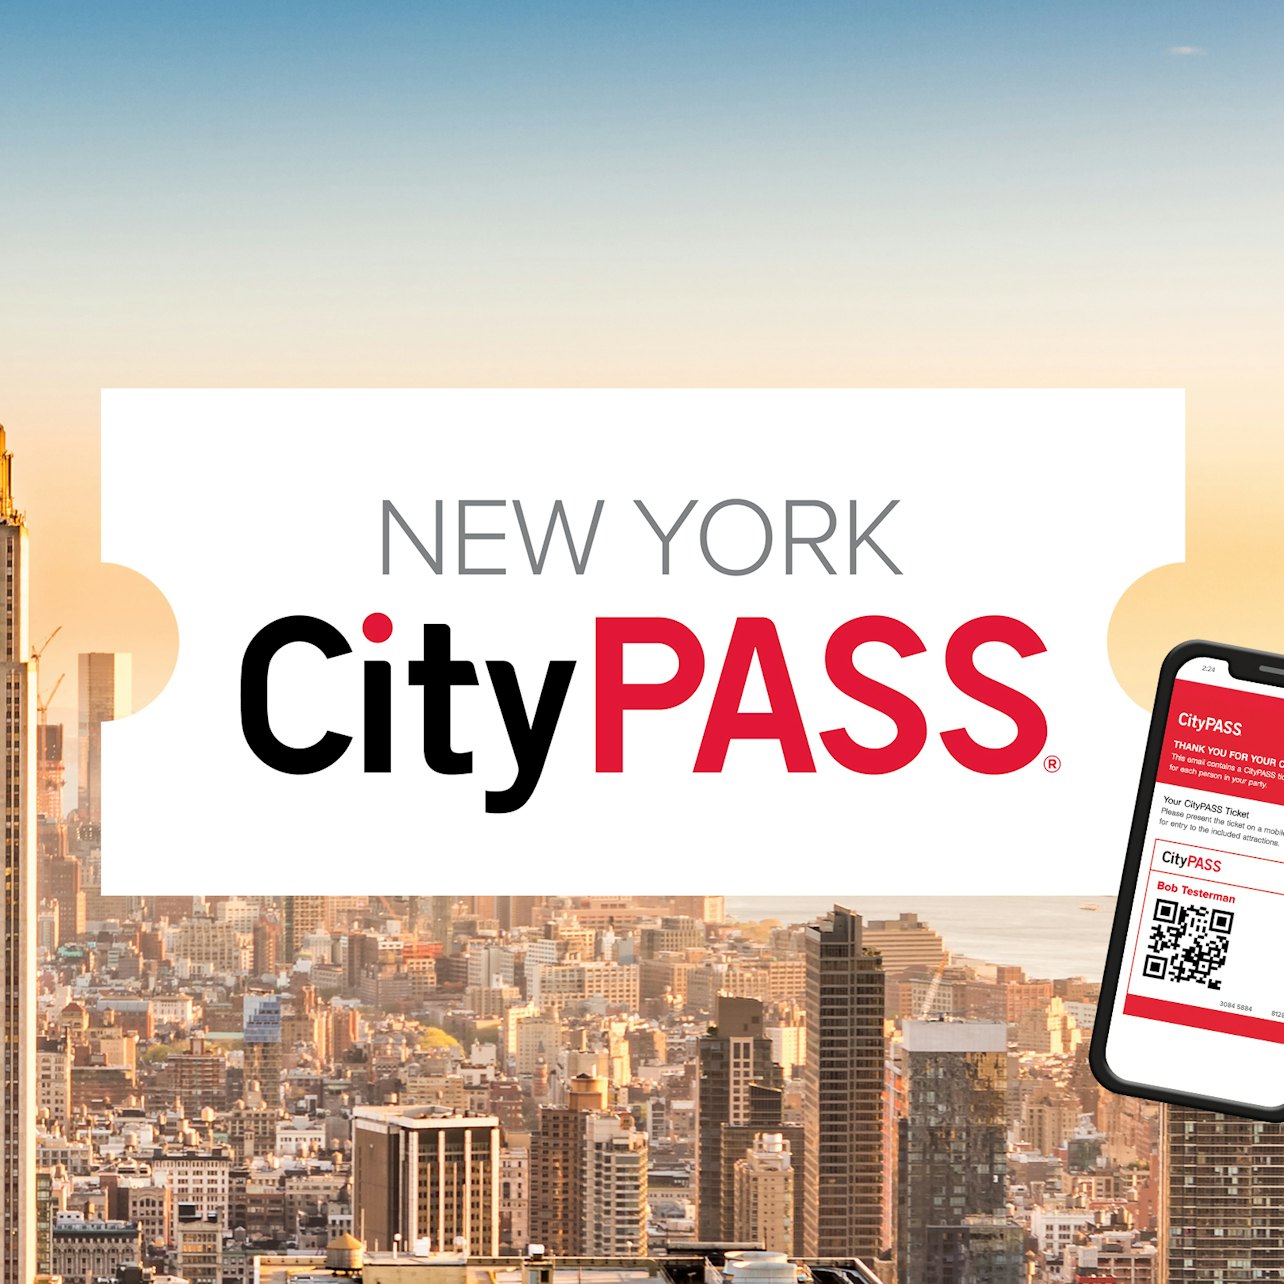 New York CityPASS: Save 40% on Admission to 5 Top Attractions - Accommodations in New York